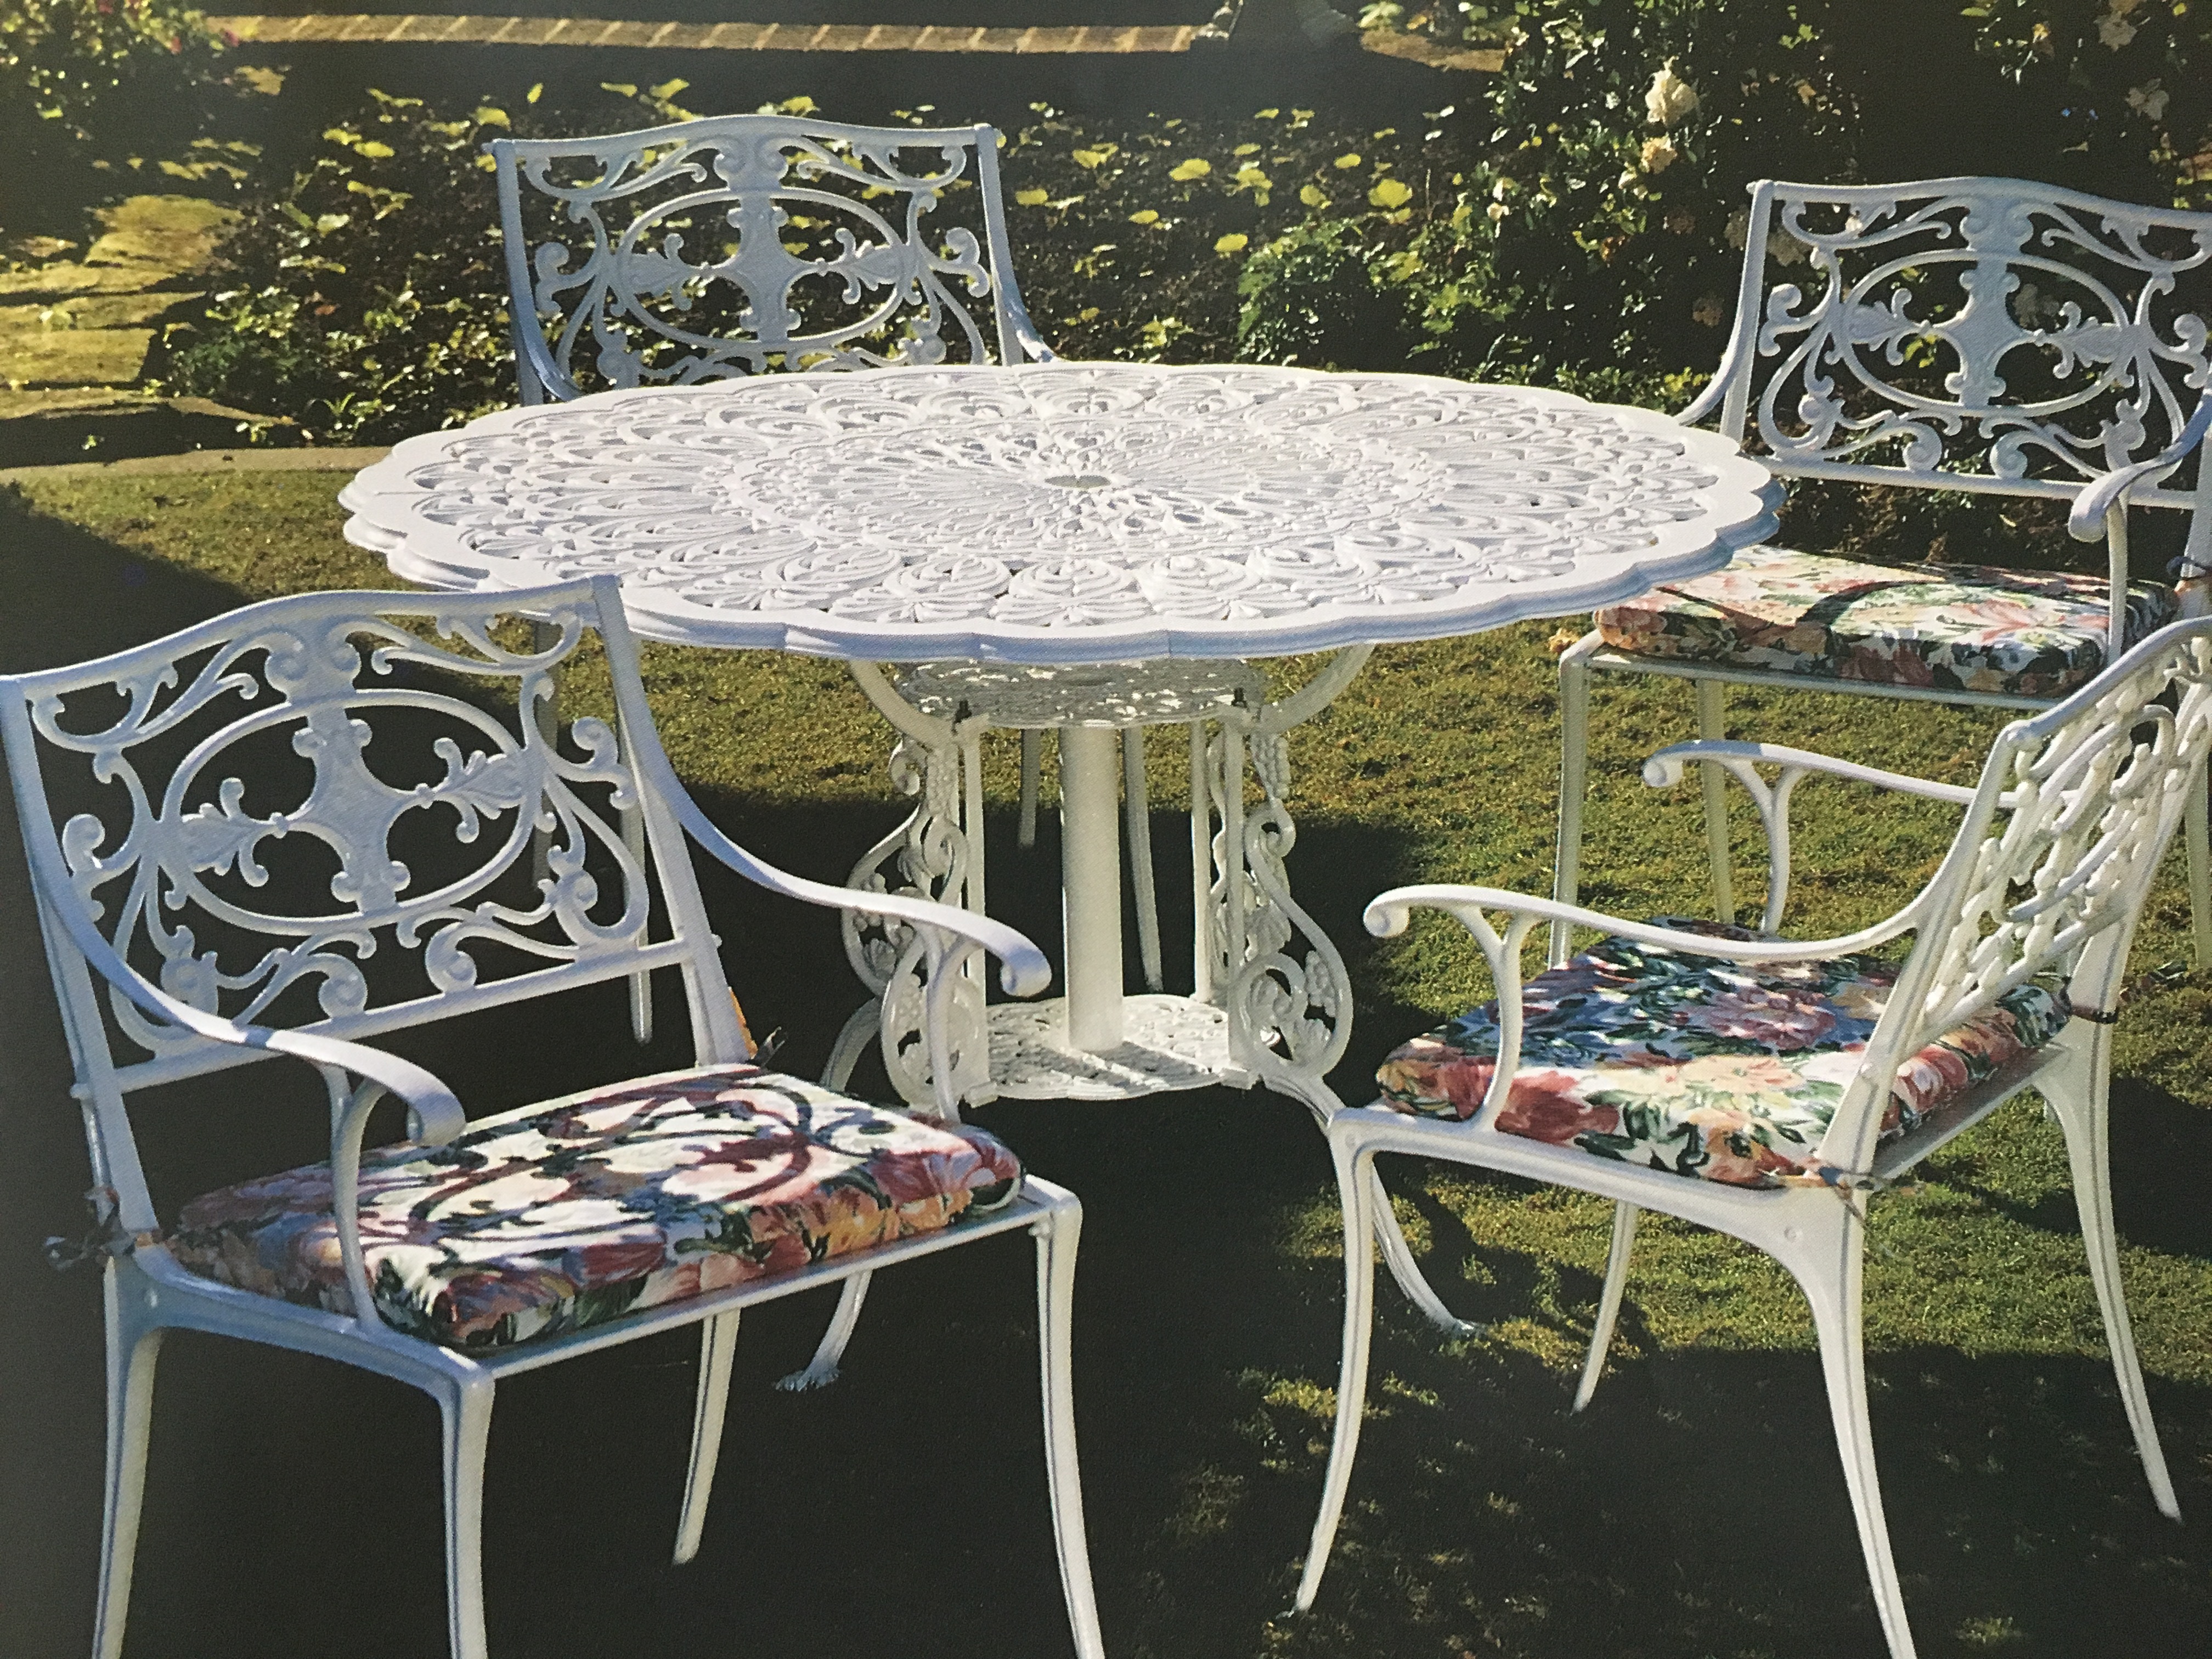 afterpay furniture oil outdoor bunnings table sunbrella chair briscoes mitre kmart vic cushions covers mimosa waterproof settings stunning side full size tennis chairs and ott for